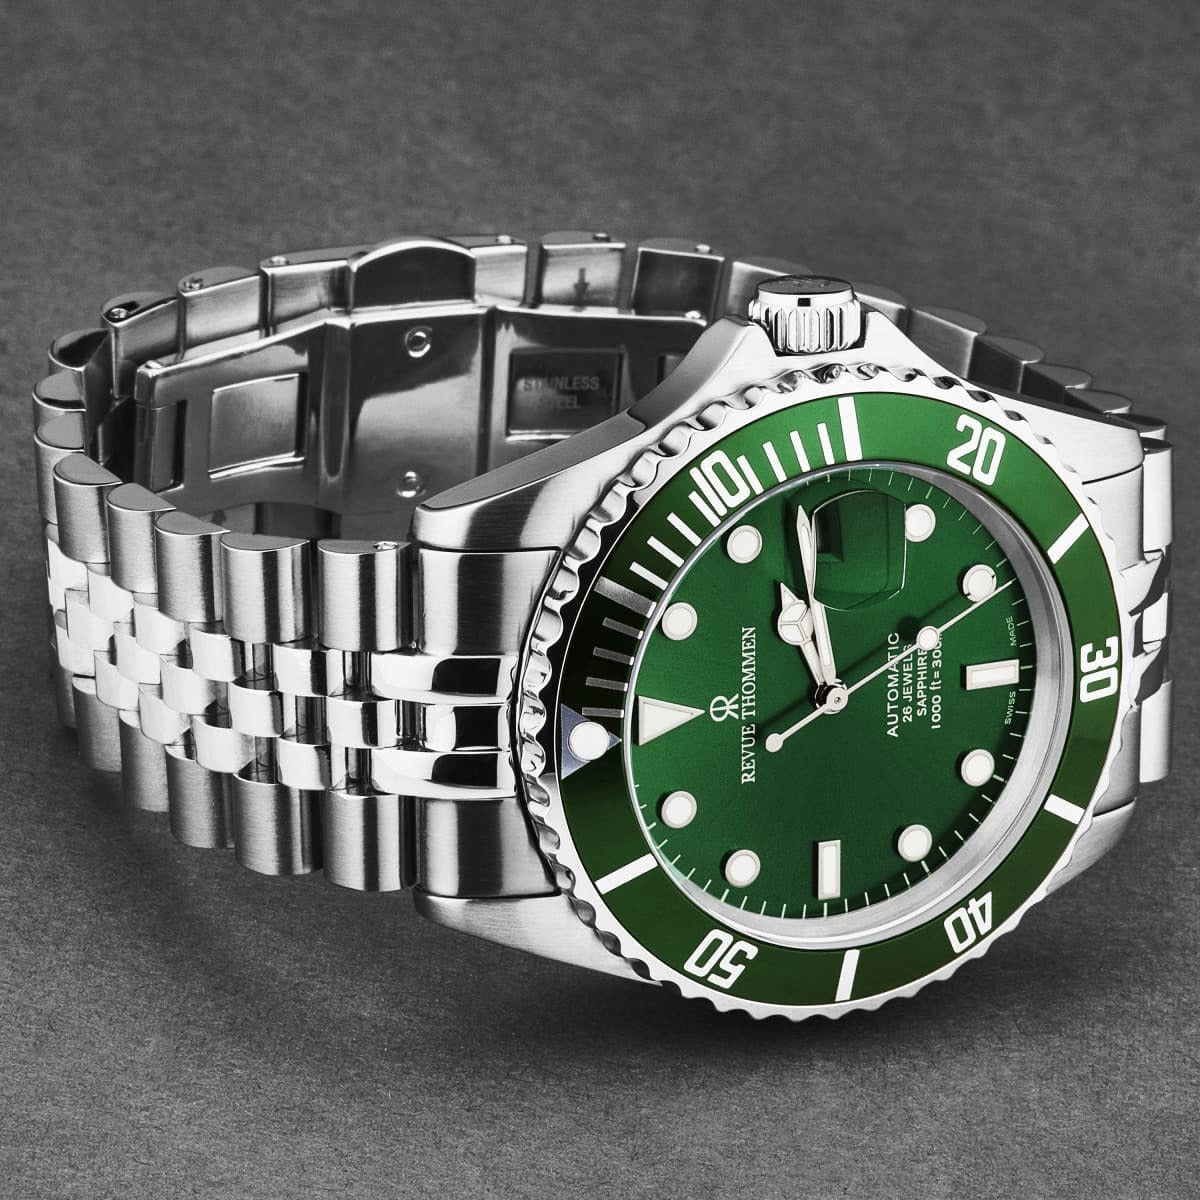 A Revue Thommen Men's 'Diver' Black Dial Stainless Steel Bracelet Automatic Watch 17571.2234 with a green dial.